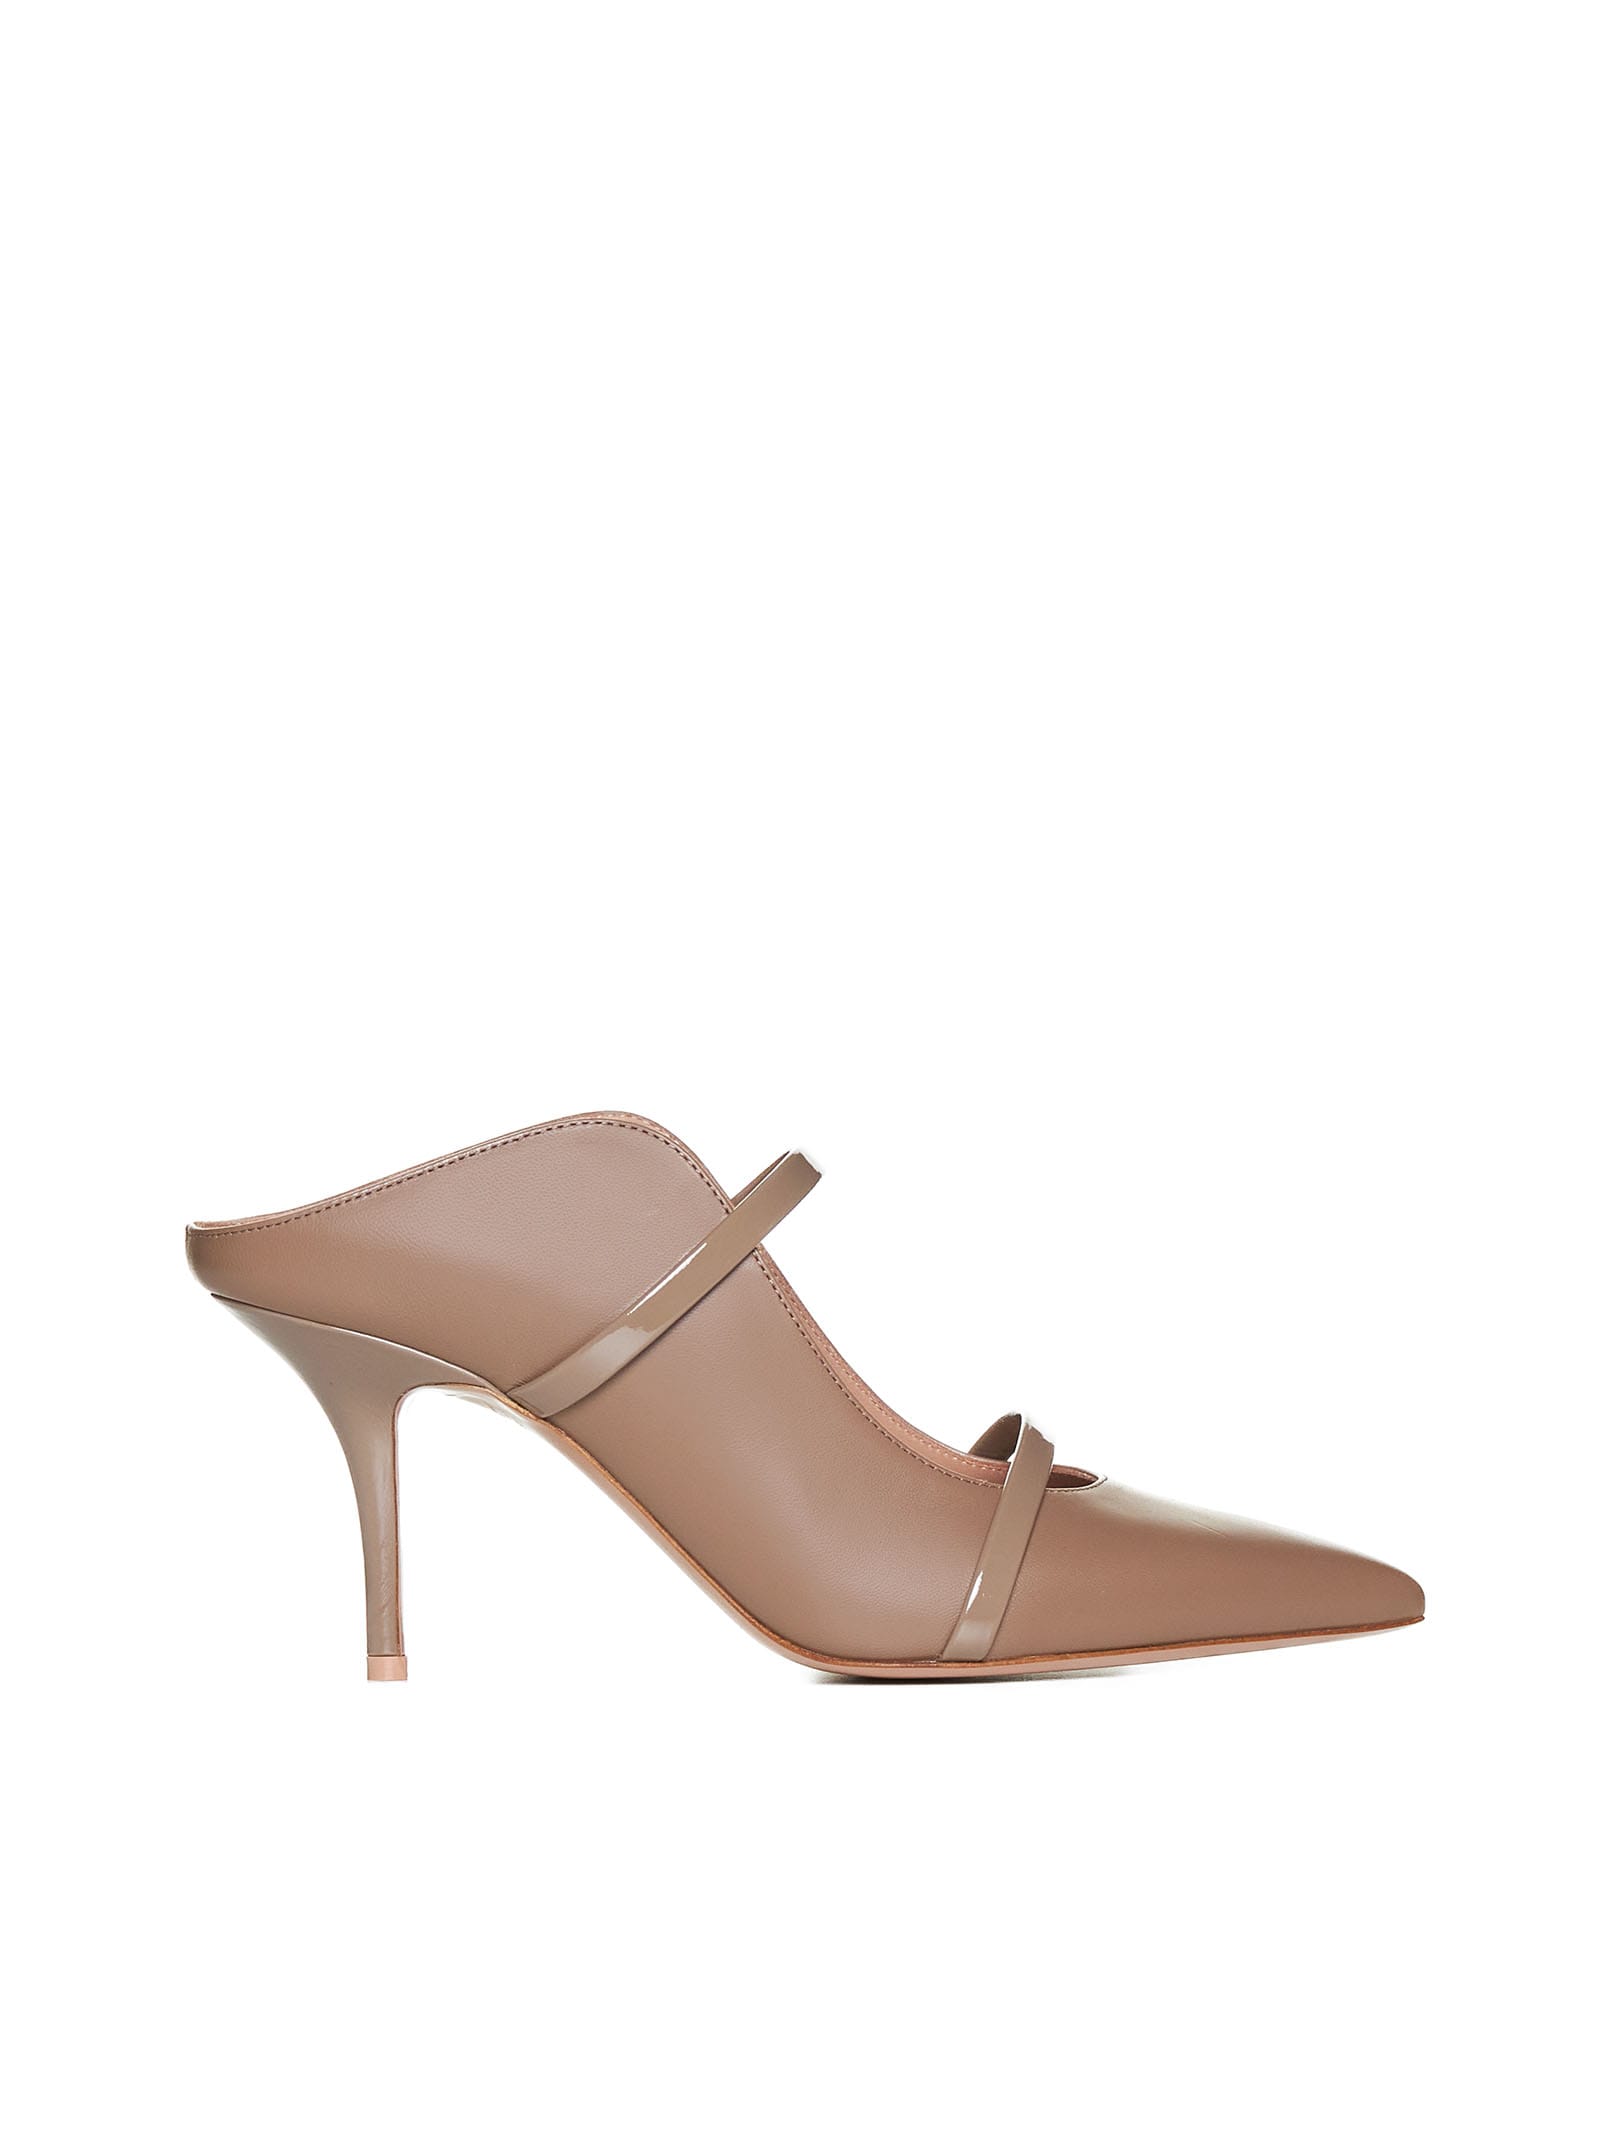 Shop Malone Souliers Sandals In Taupe/taupe